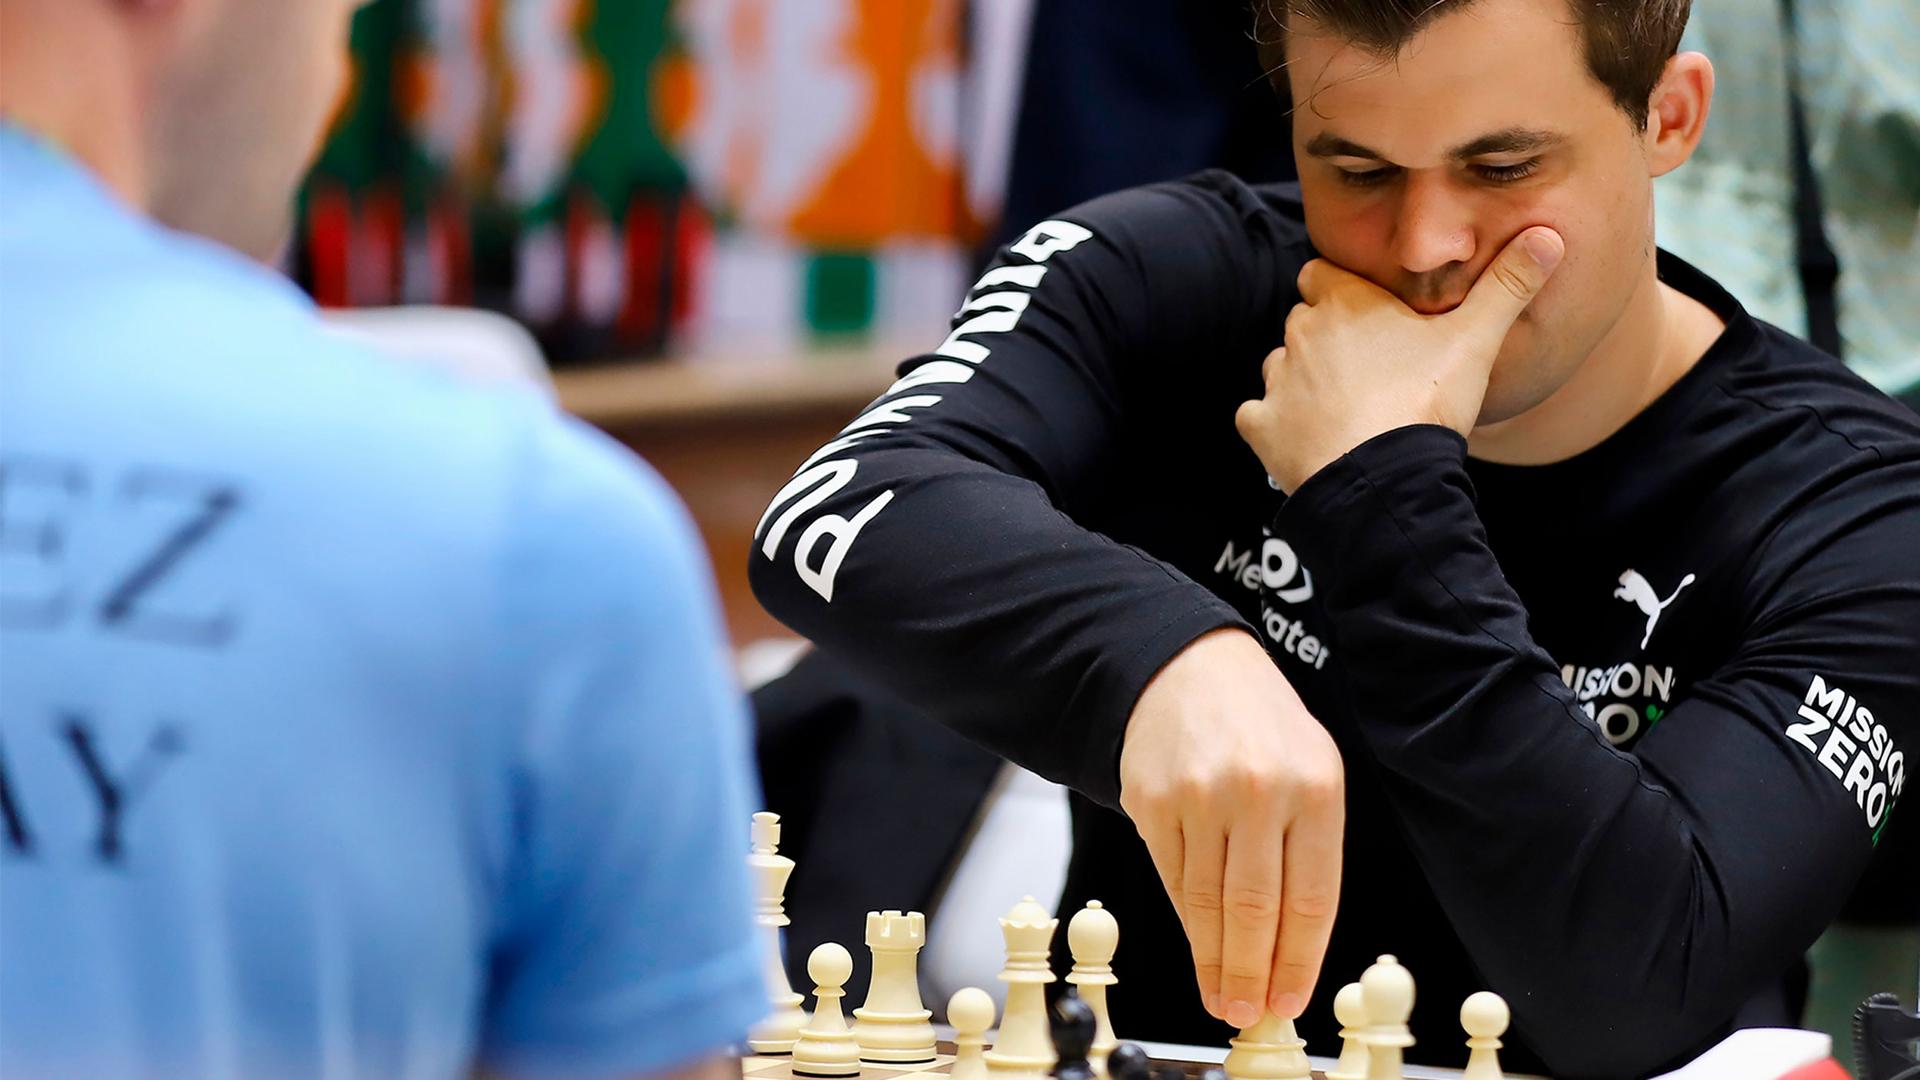 Norway's World Chess Champion Magnus Carlsen competes in the 44th Chess Olympiad in Mamallapuram, India